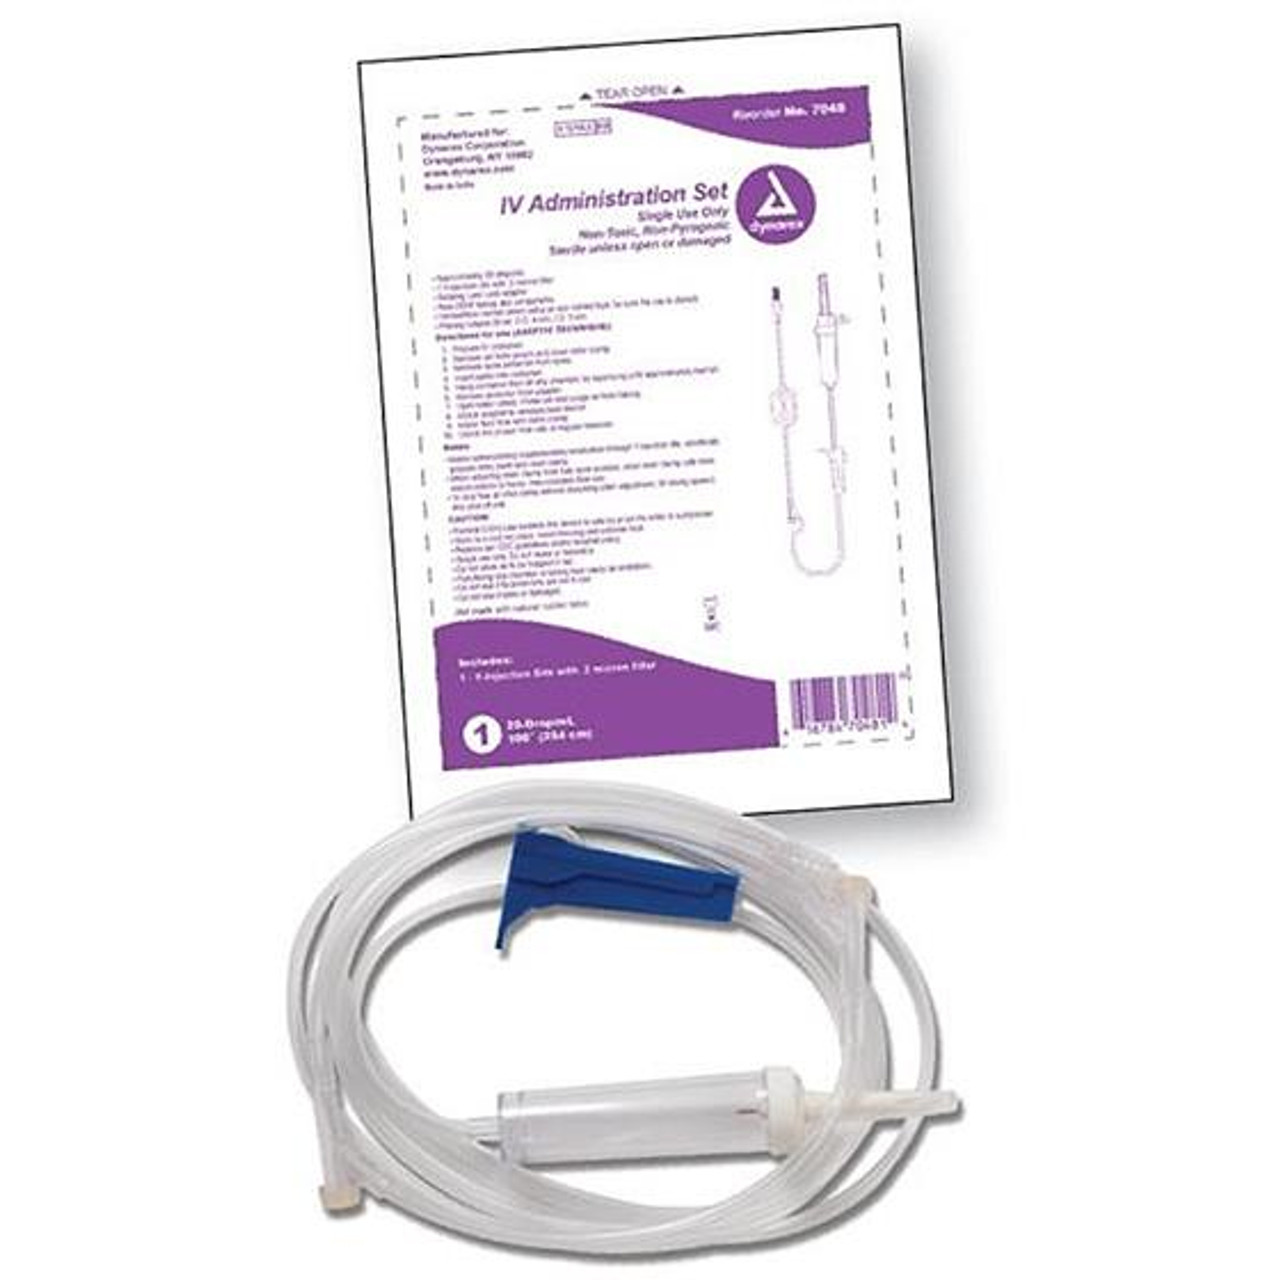 Needleless IV Drip Sets with Luer and Pierceable Ports